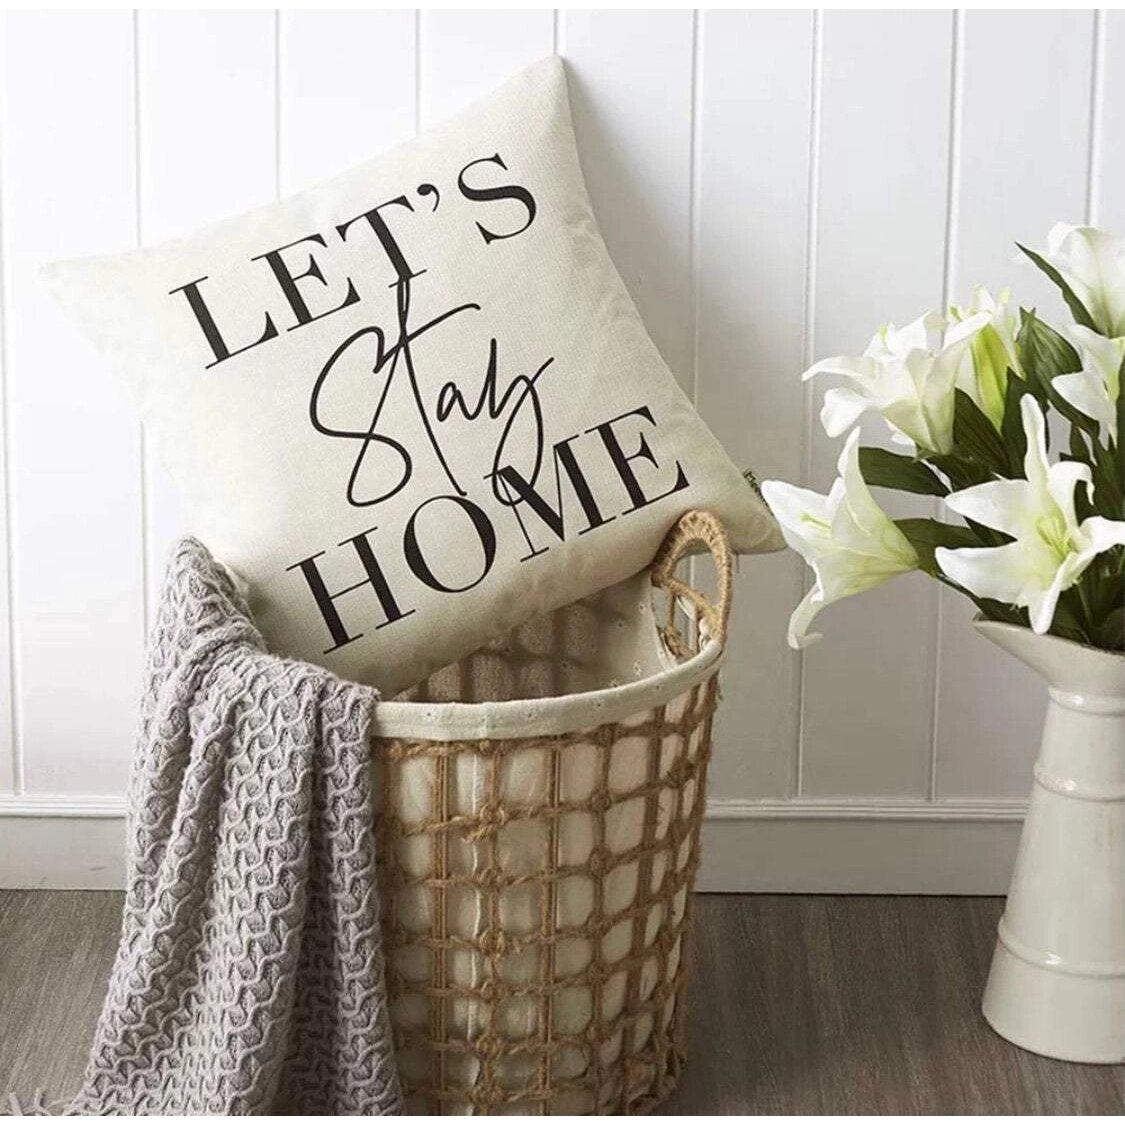 Cream throw cushion with black 'Lets Stay Home' text, on a washing basket with a grey blanket and next to white lilies.